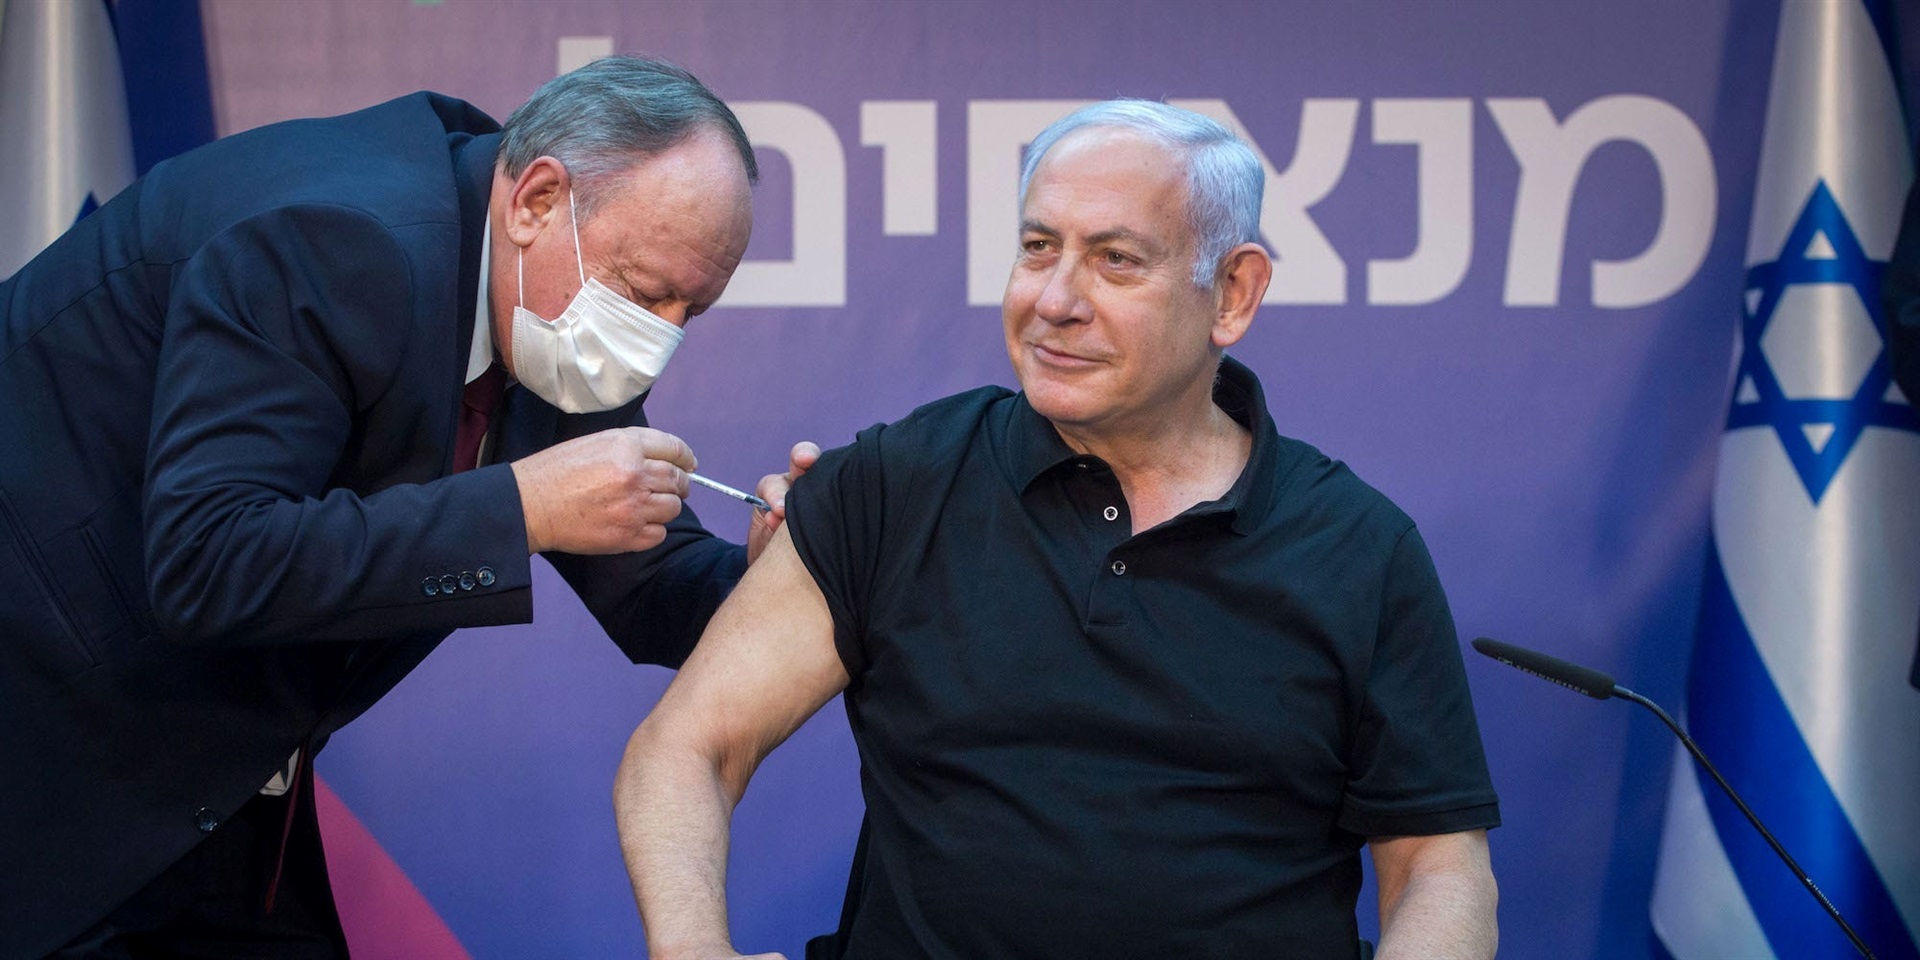 netanyahu-eyes-vaccine-victory-as-israel-heads-for-fourth-vote-news24